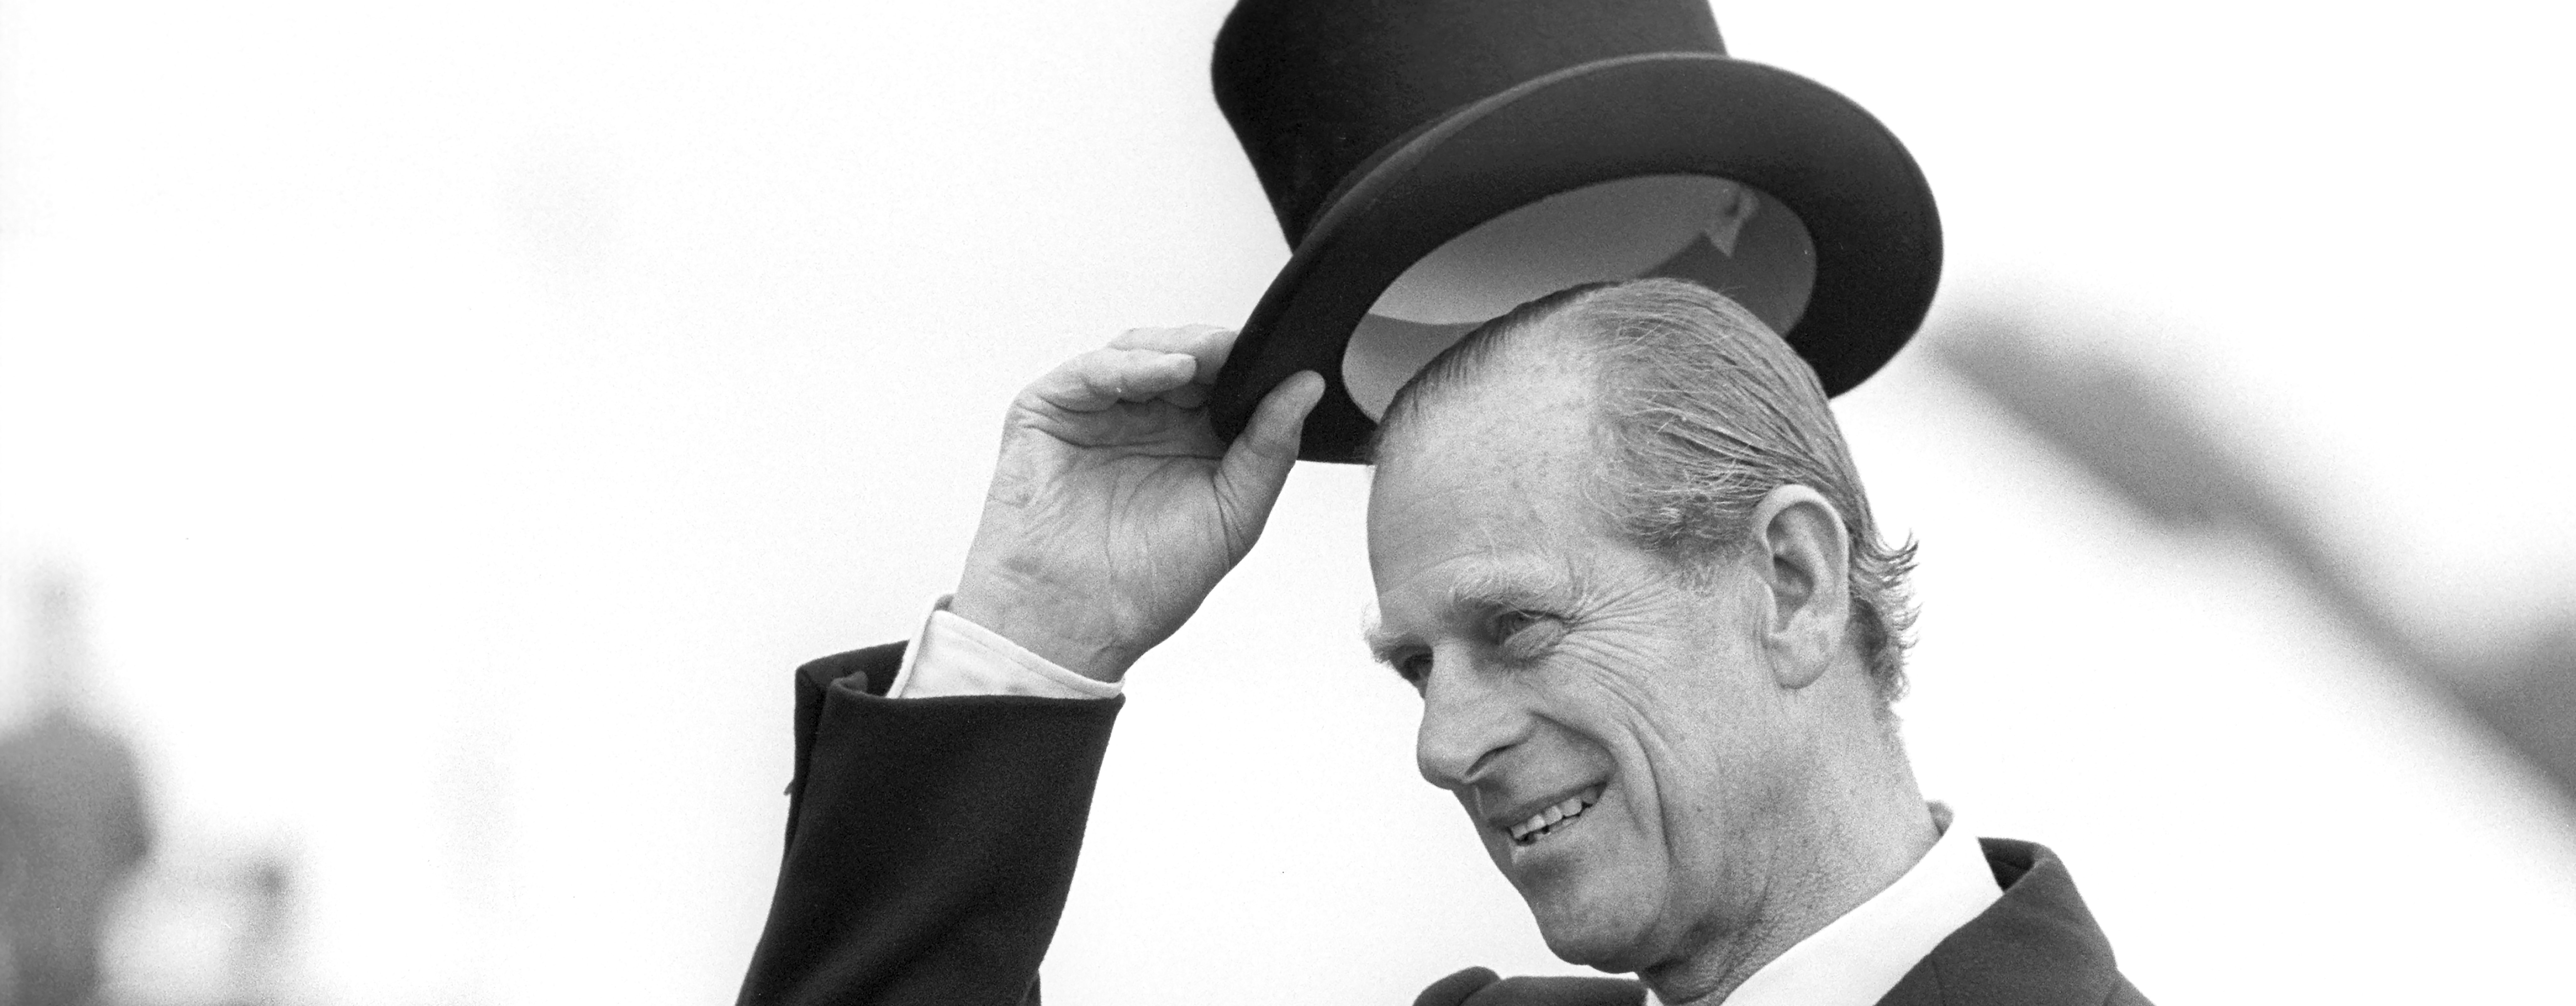 Prince Philip raises his top hat to acknowledge a crowd